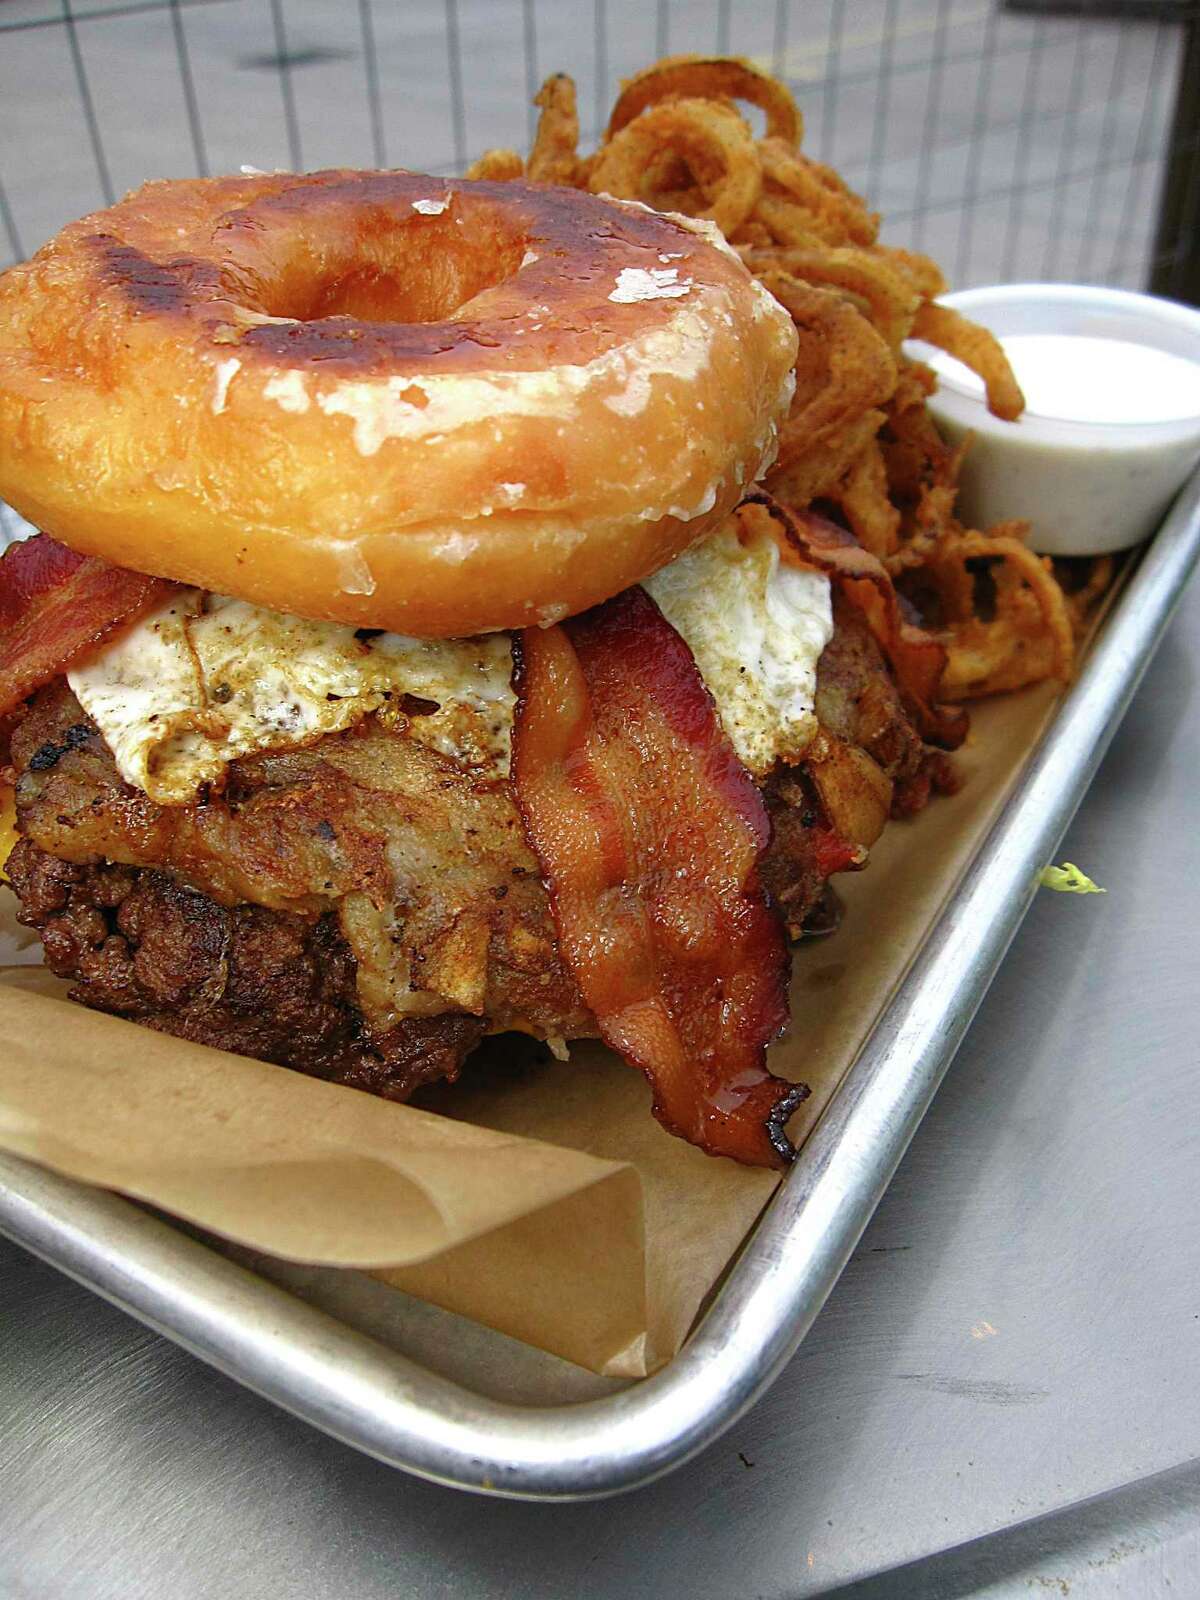 The Krispy Kreme Brunch Burger is two beef patties with hashbrowns, a fried egg, bacon and American cheese between two Krispy Kreme doughnuts at Lucy Cooper's Ice House